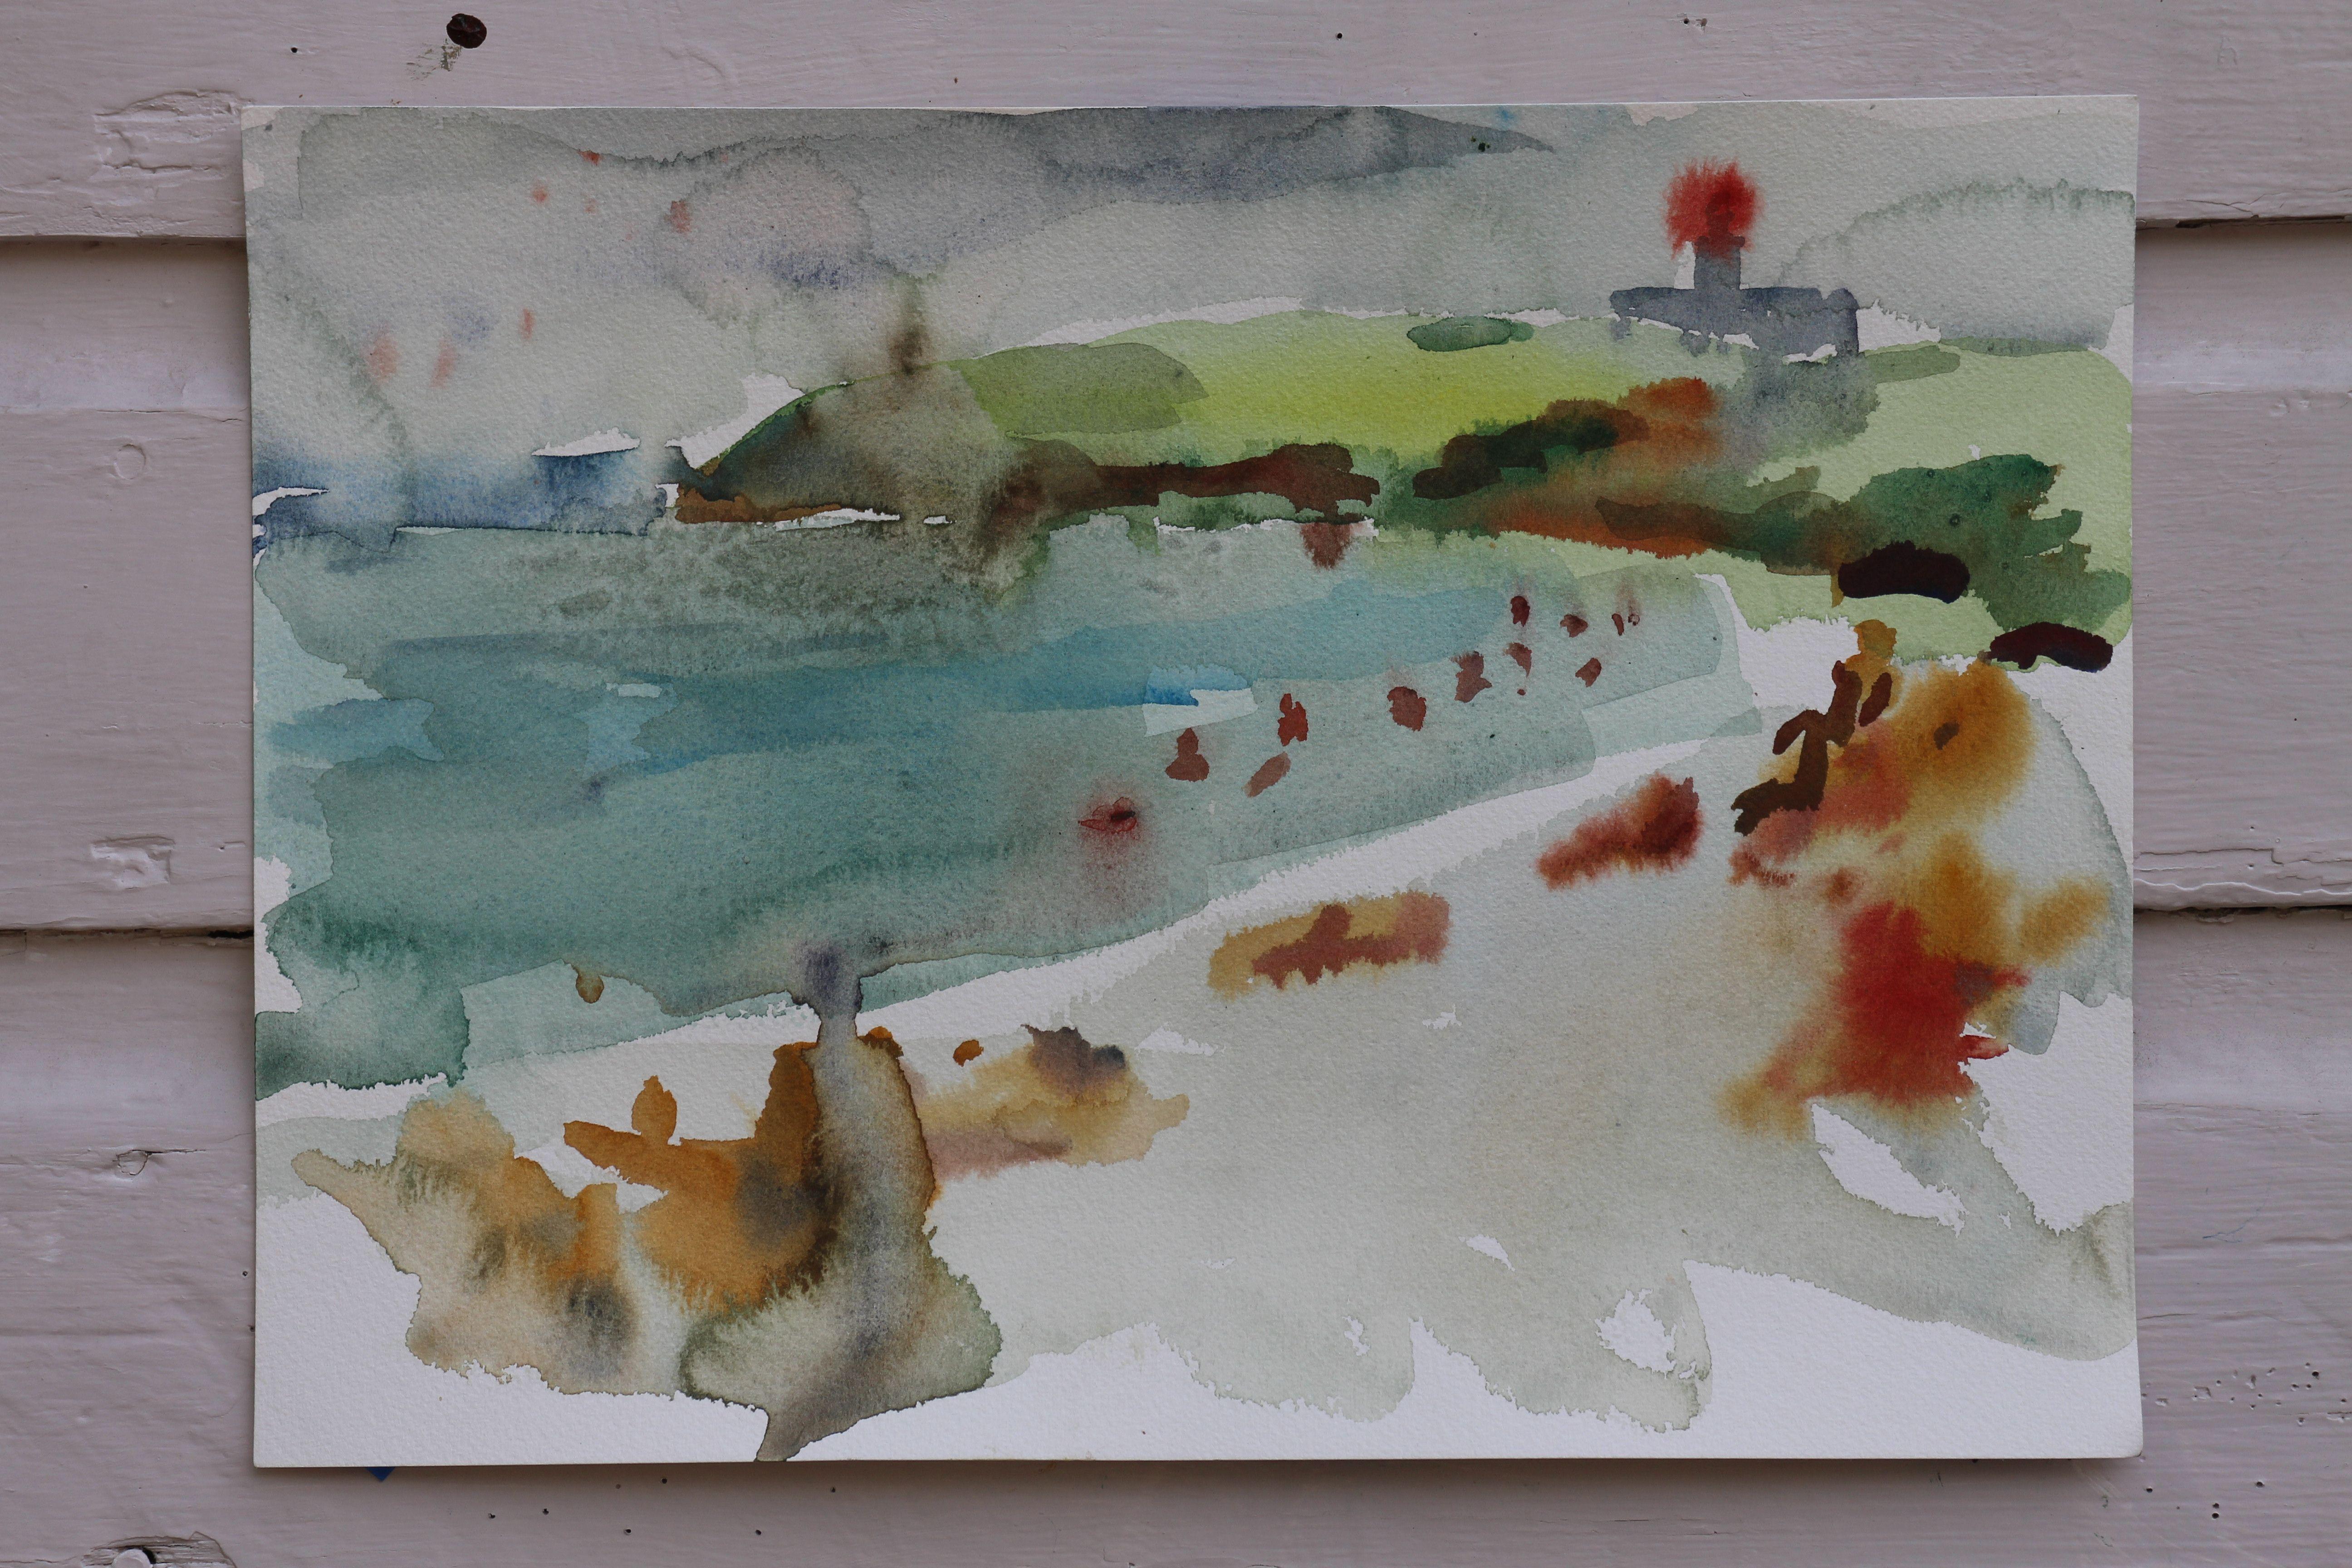 Plein air watercolor from La Playuela beach in Cabo Rojo, Puerto Rico. It was the last day of freedom before the curfew. March 15, 2020. :: Painting :: Impressionist :: This piece comes with an official certificate of authenticity signed by the